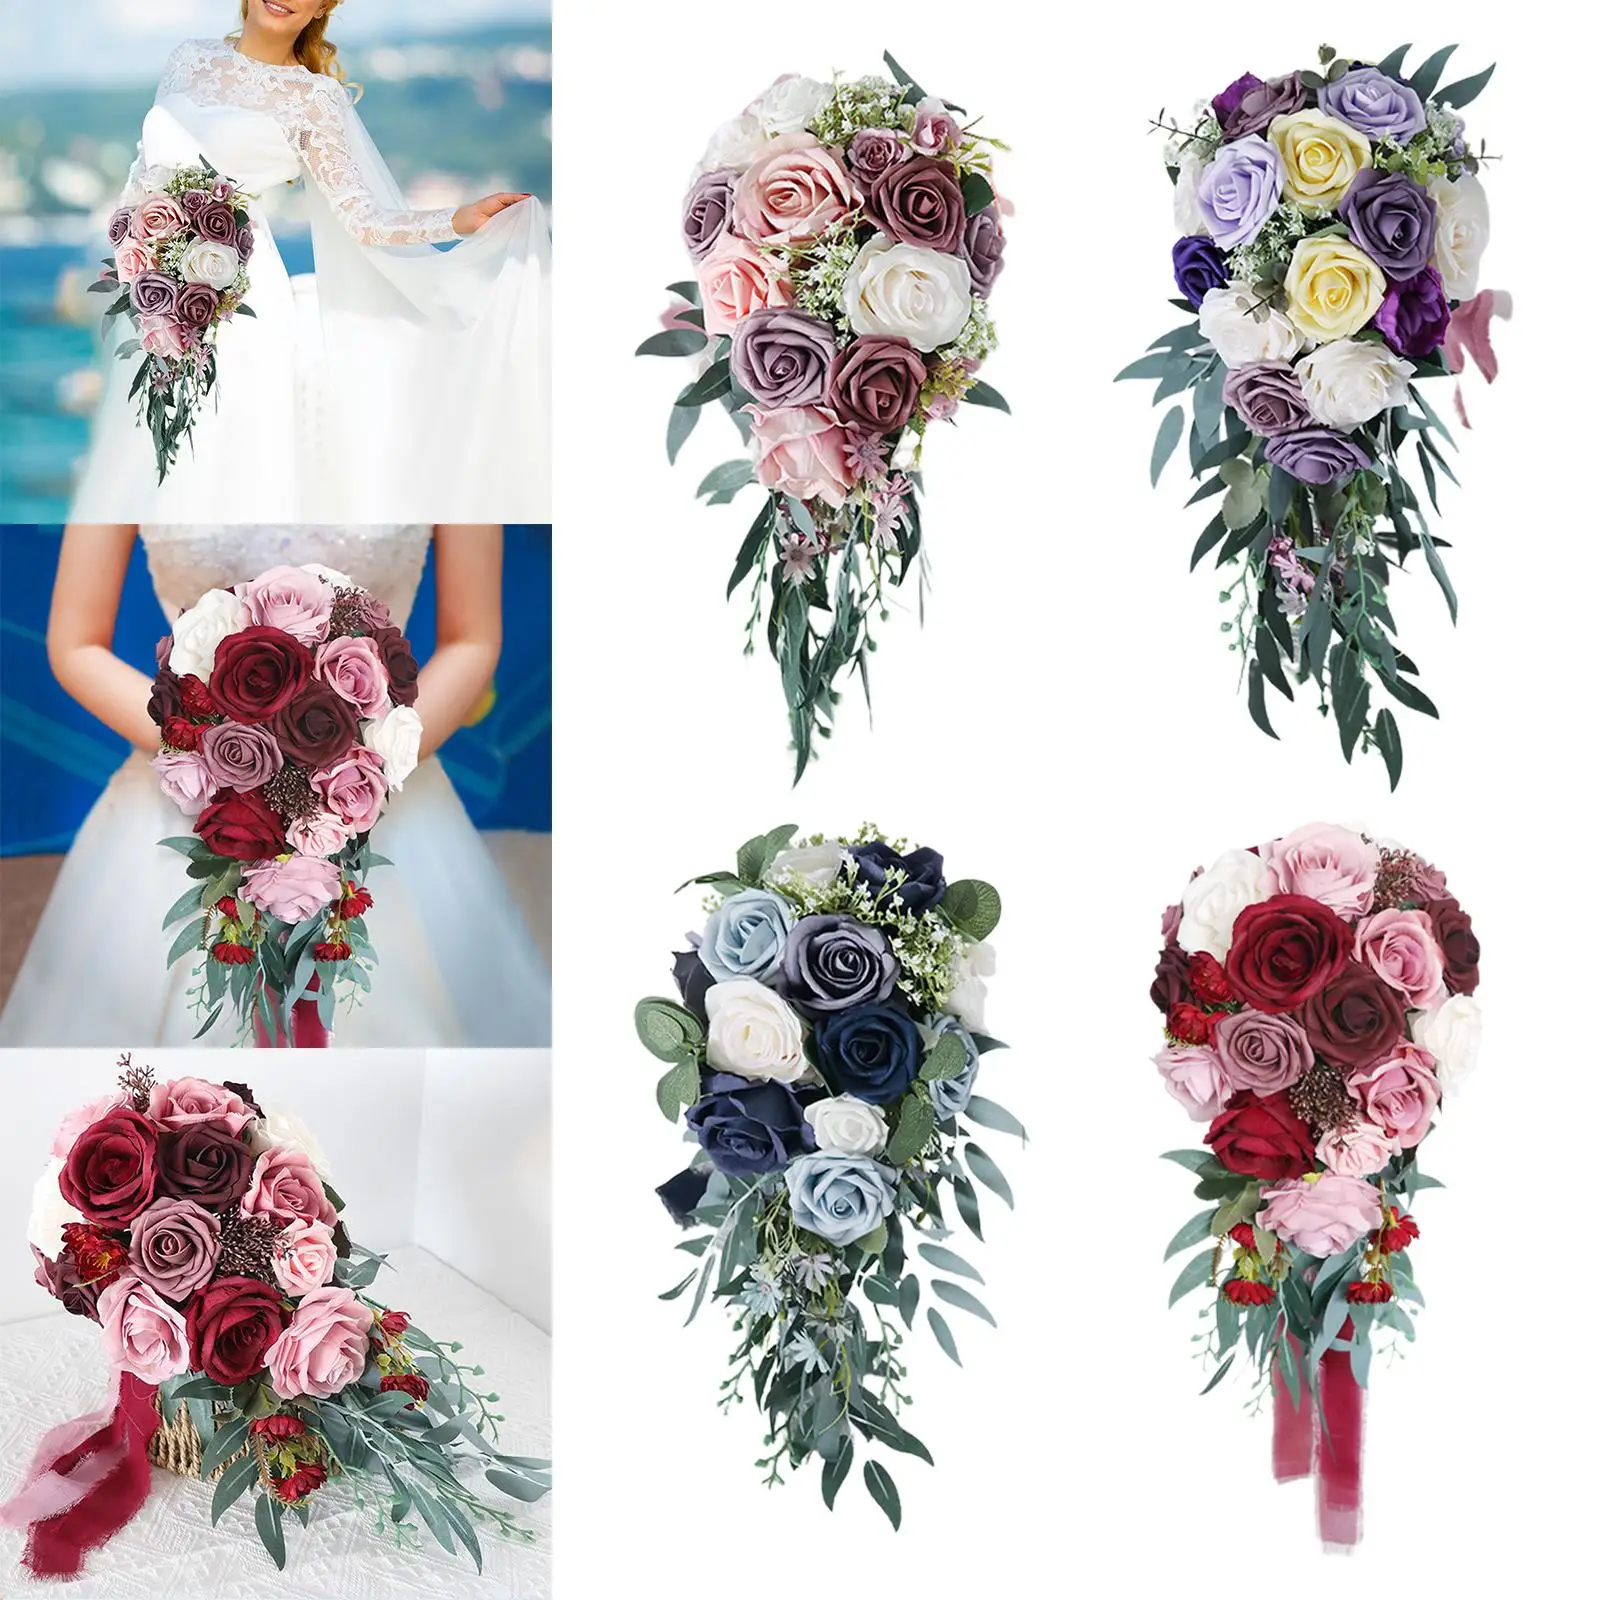 Elegant Wedding Bouquets for Bride Waterfall Shape Artificial Roses Silk Cloth Holding Bouquet for Church Anniversary Home Decor